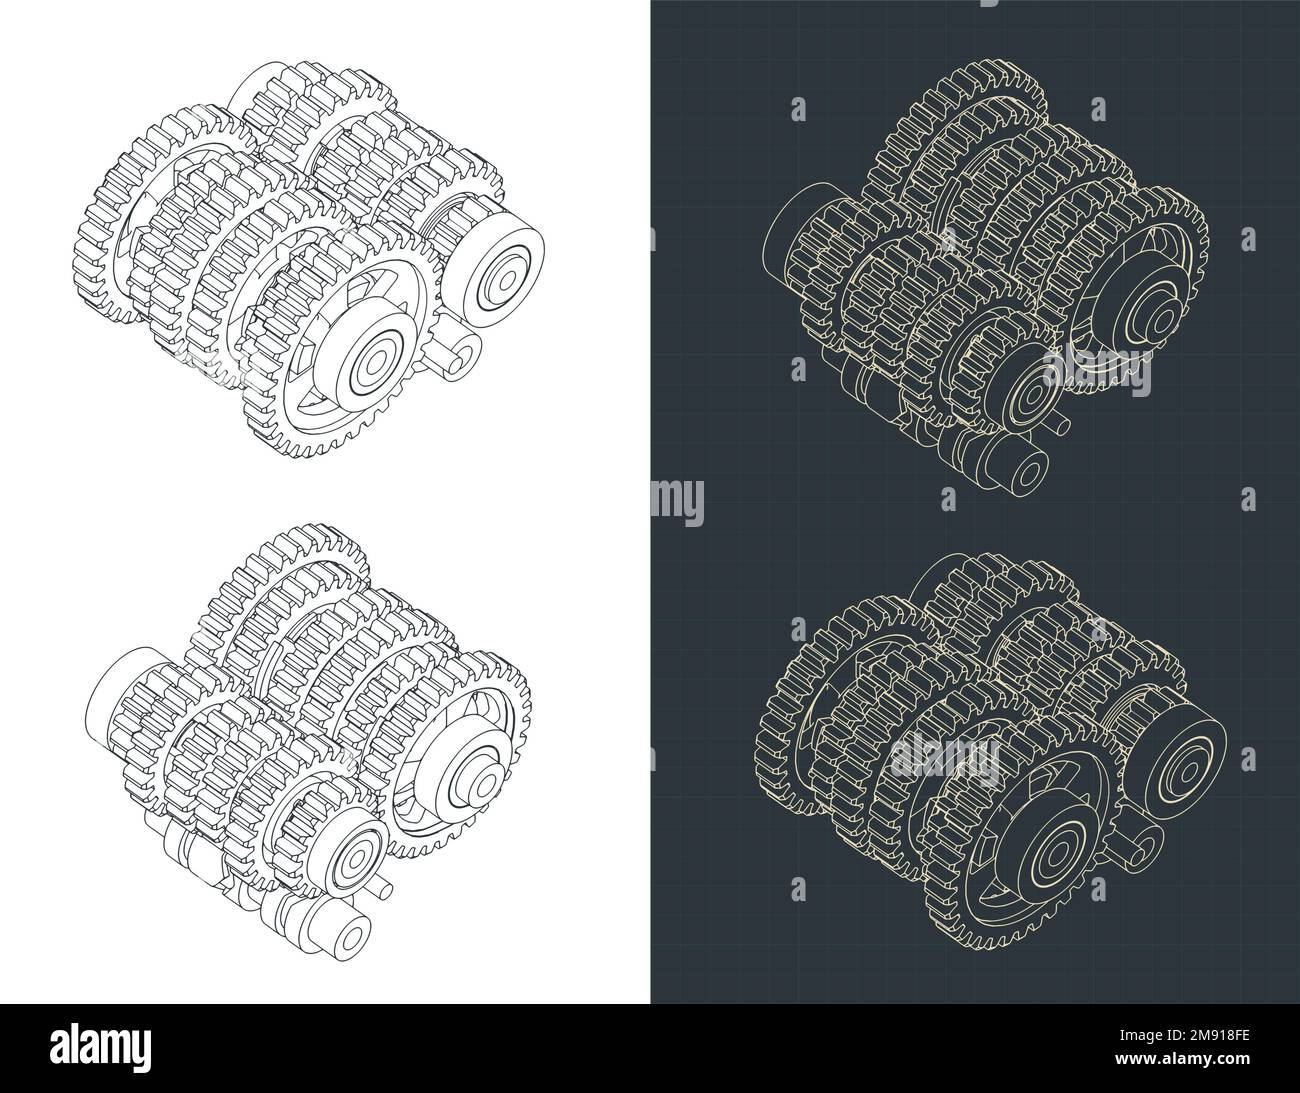 Stylized vector illustration of isometric blueprints of sequential transmission gearbox Stock Vector